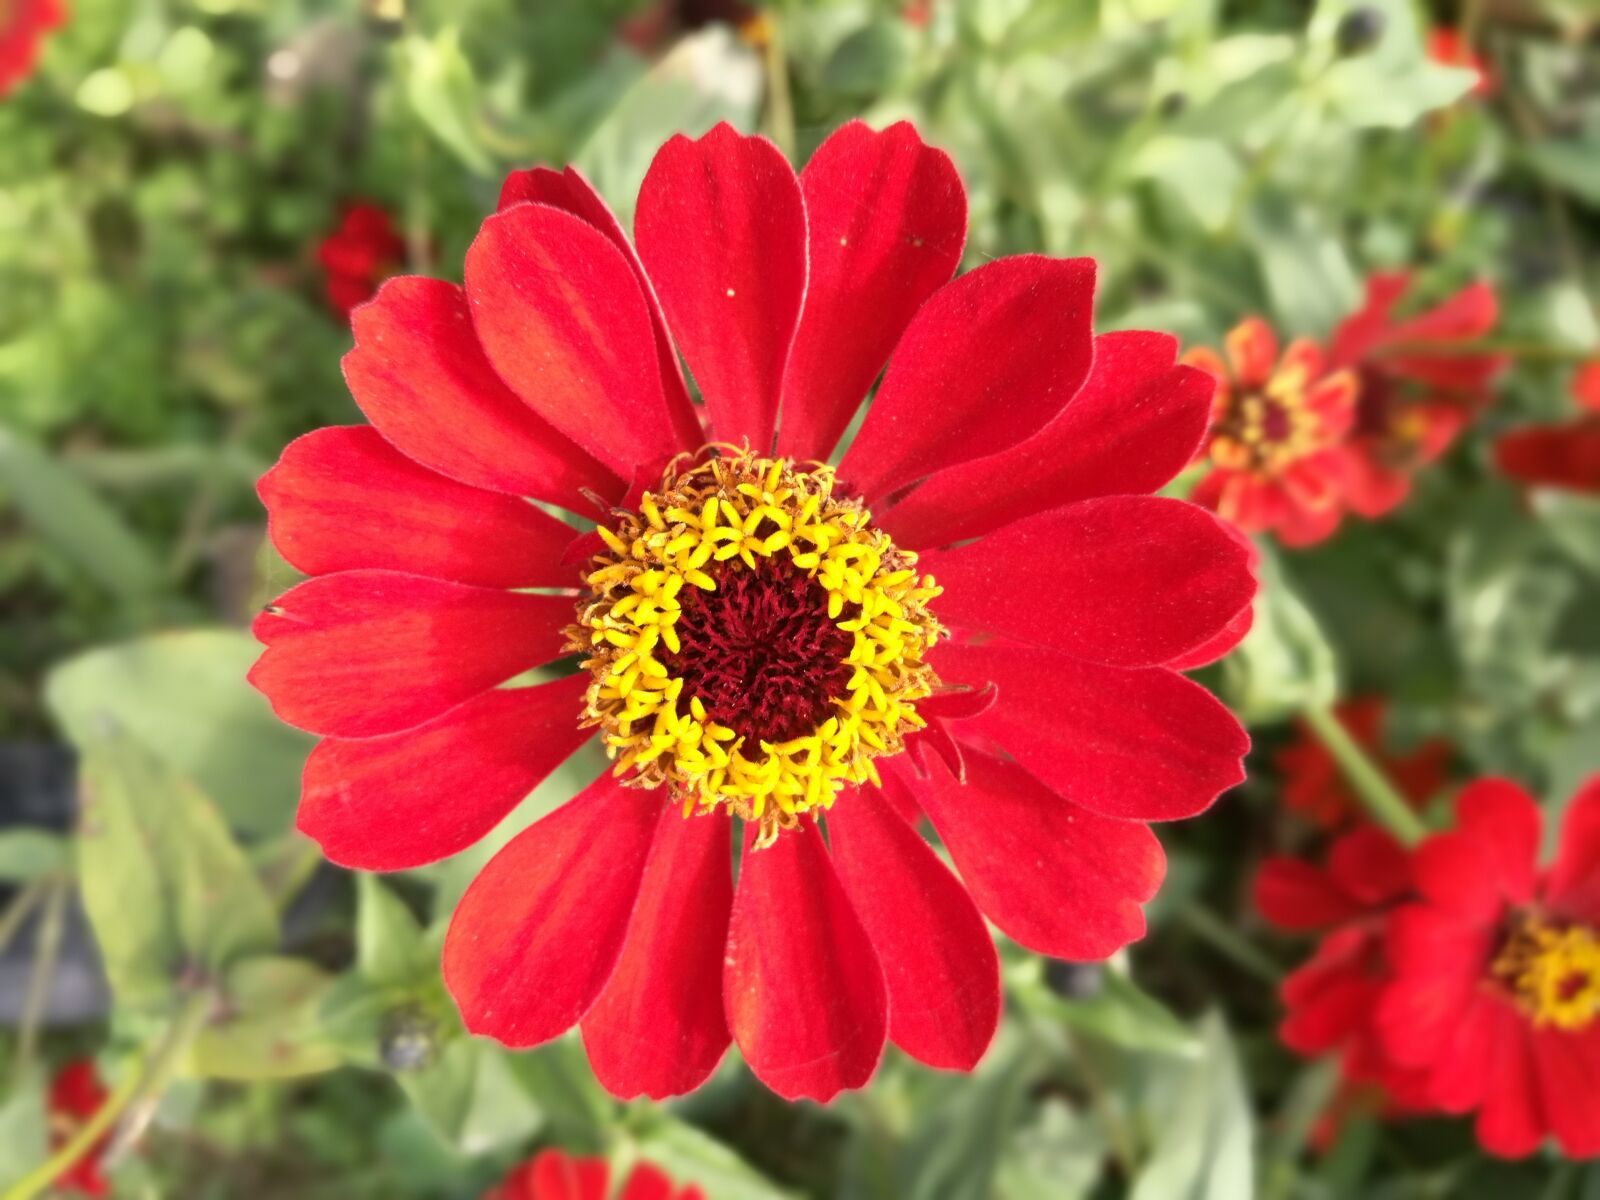 HUAWEI Honor 8 sample photo. Flower, red flowers, hope photography